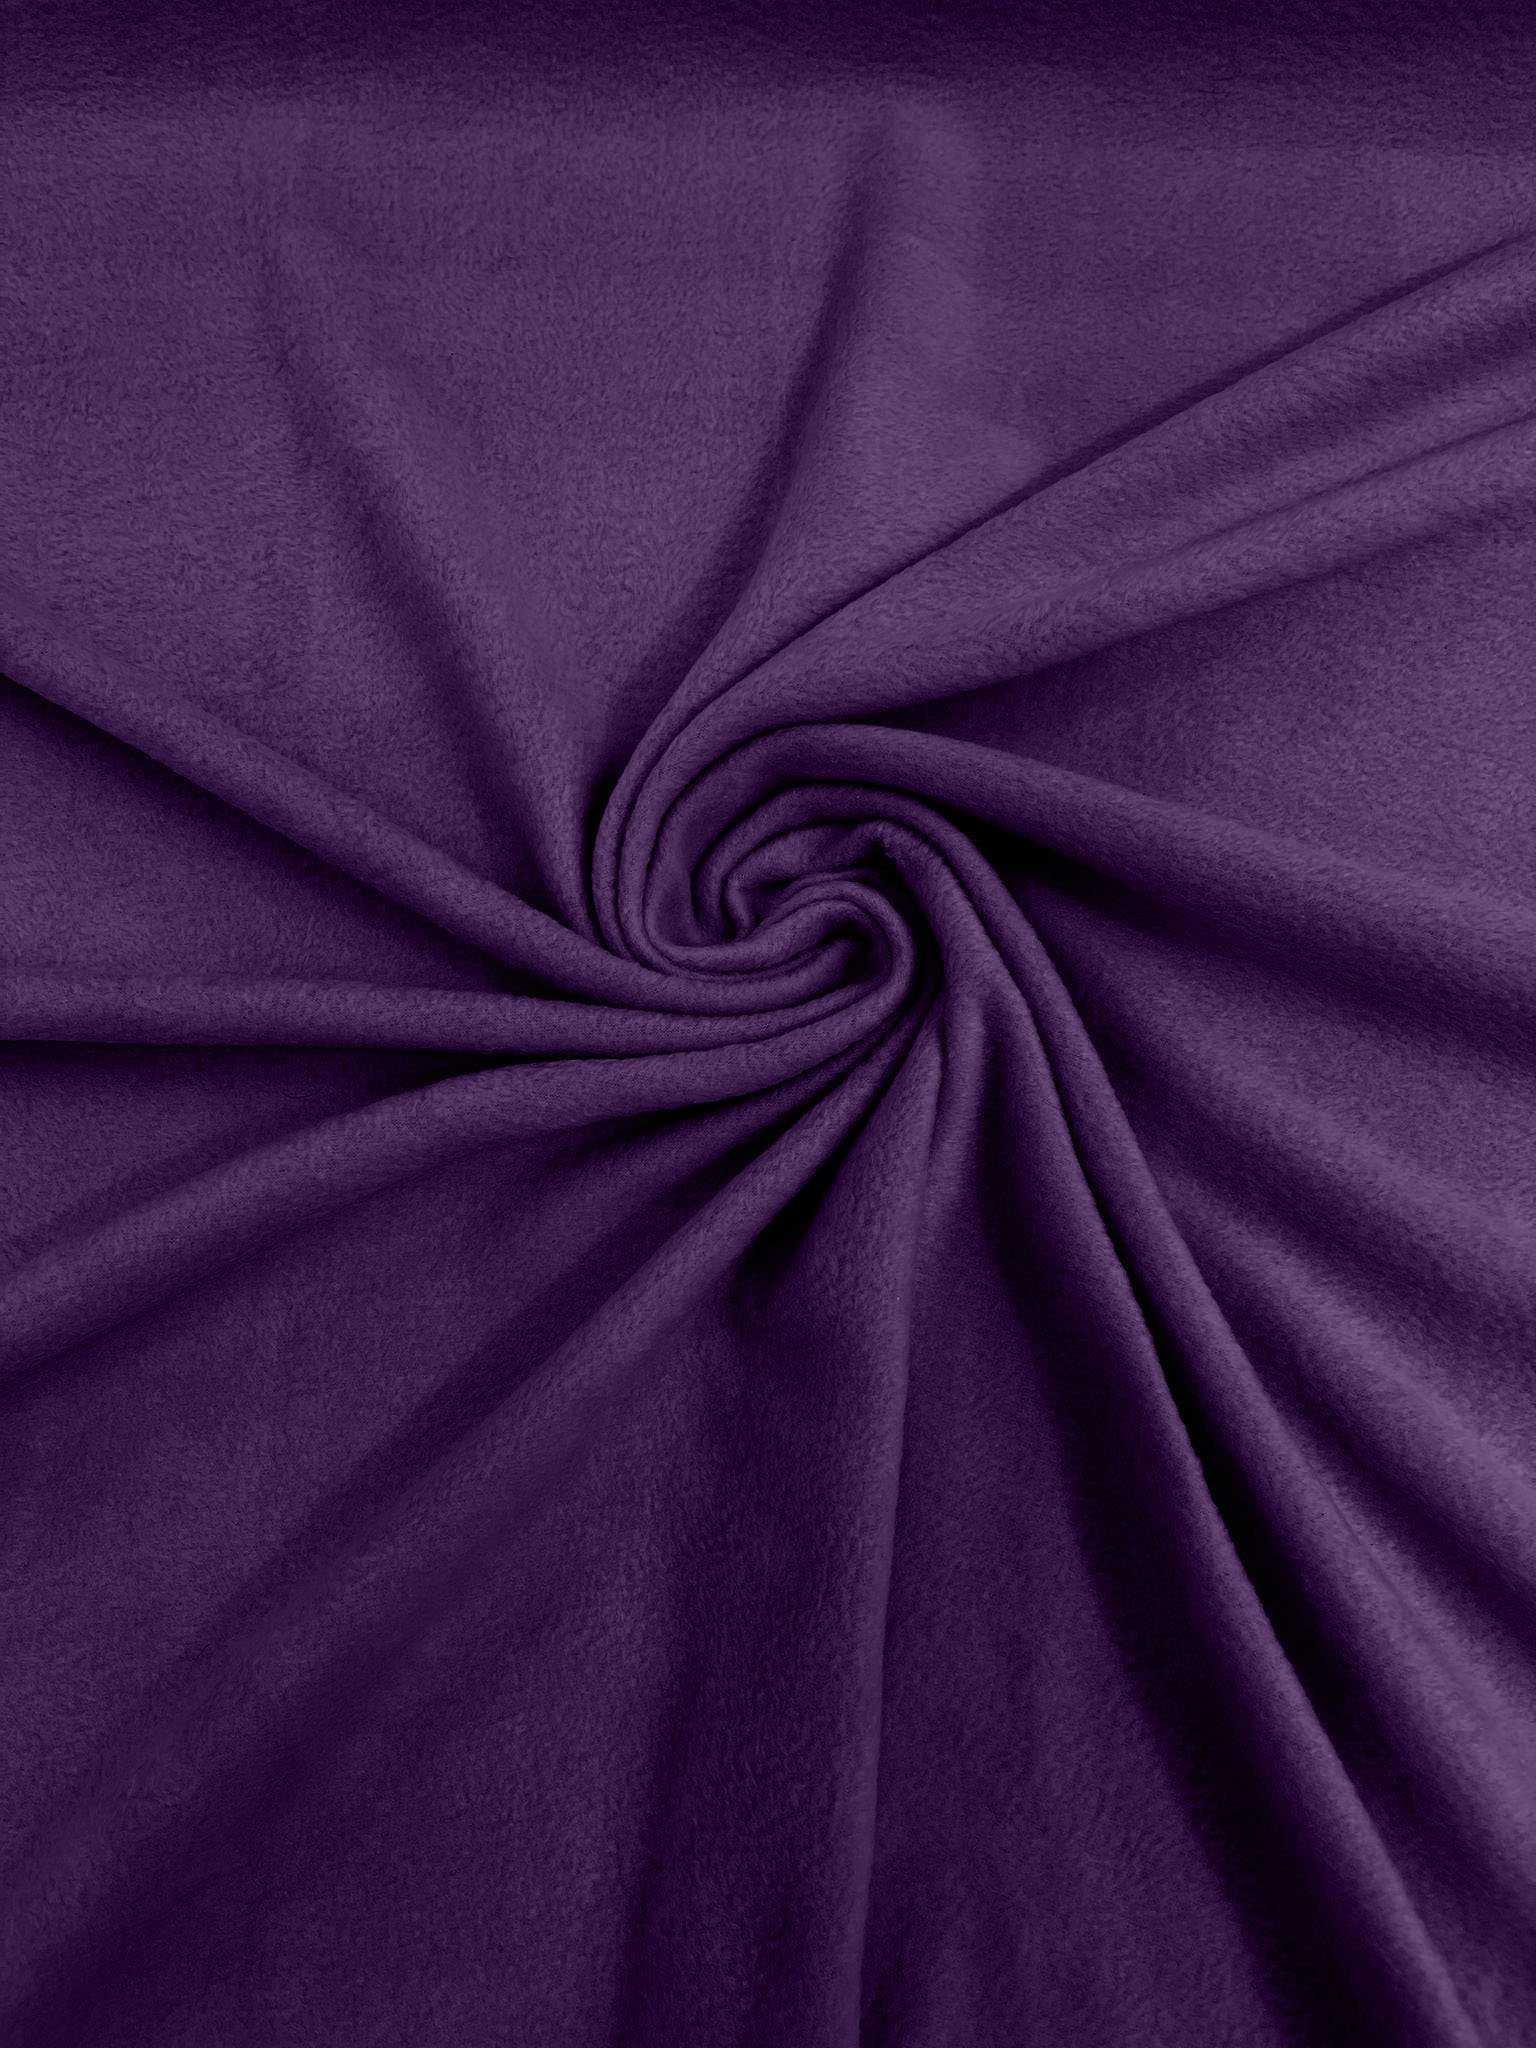 Purple Solid Polar Fleece Fabric Anti-Pill 58" Wide Sold by The Yard